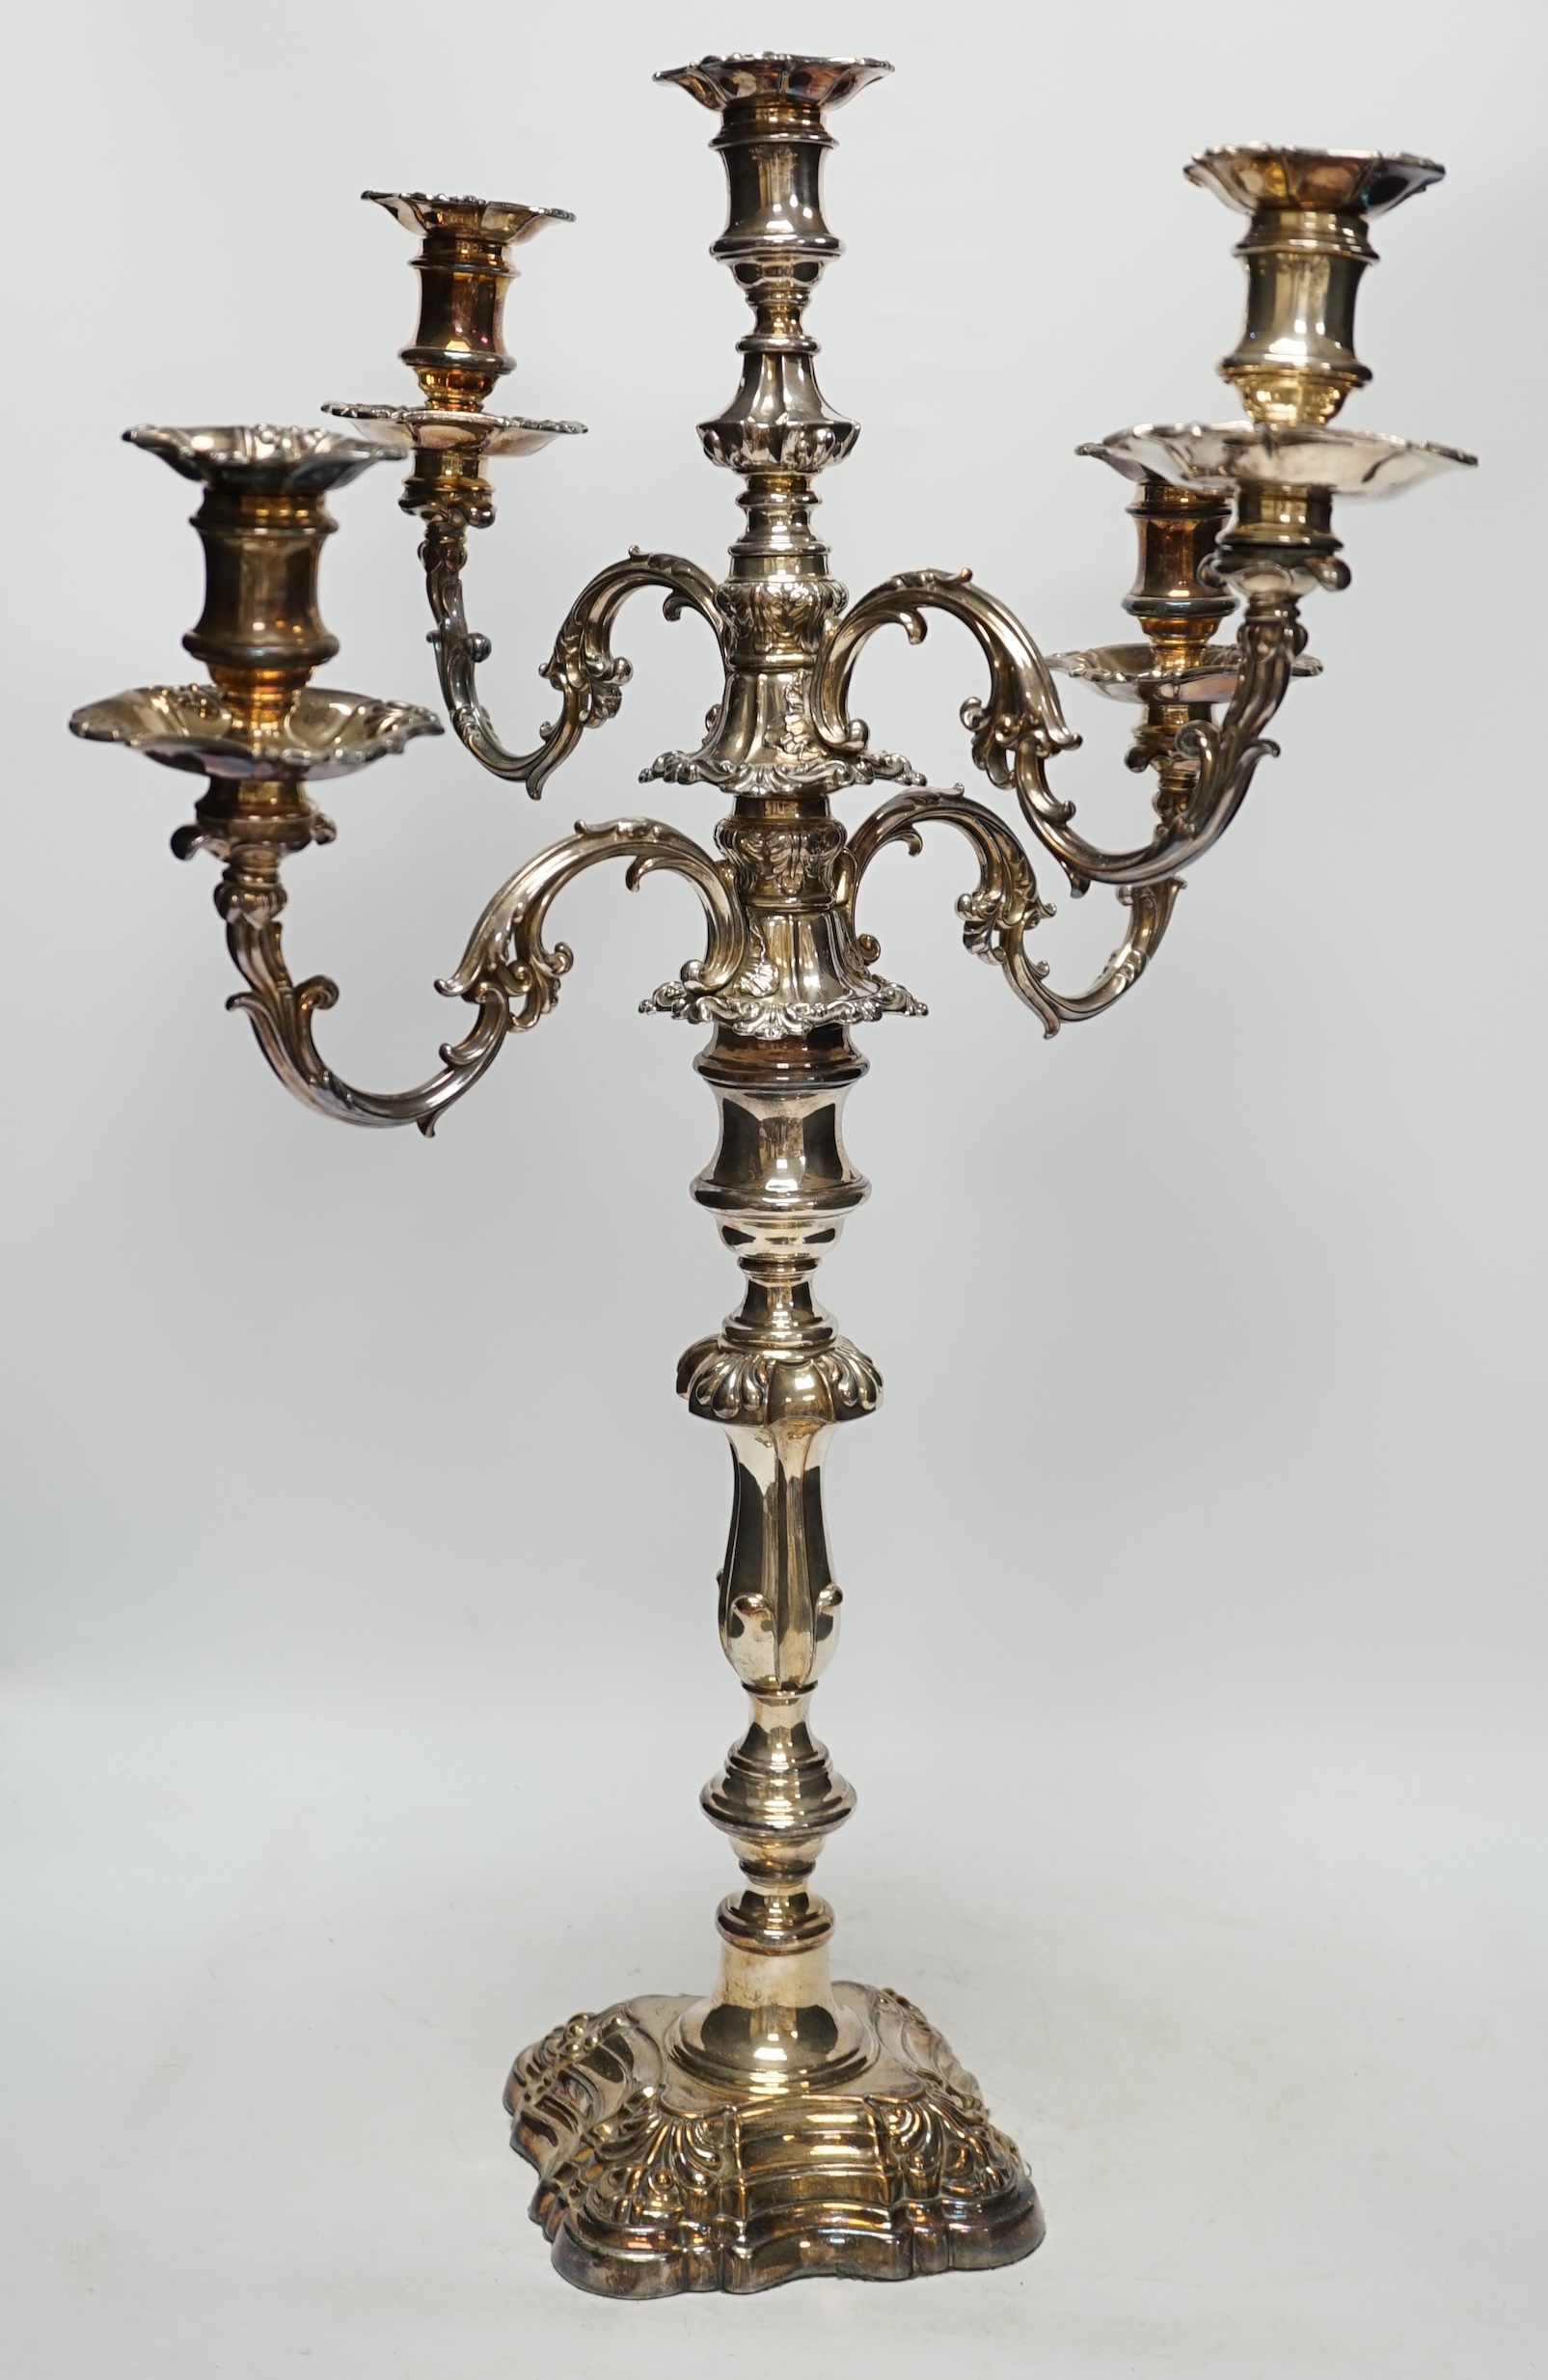 A large silver plated candelabrum. Condition - one candle holder broken, overall poor